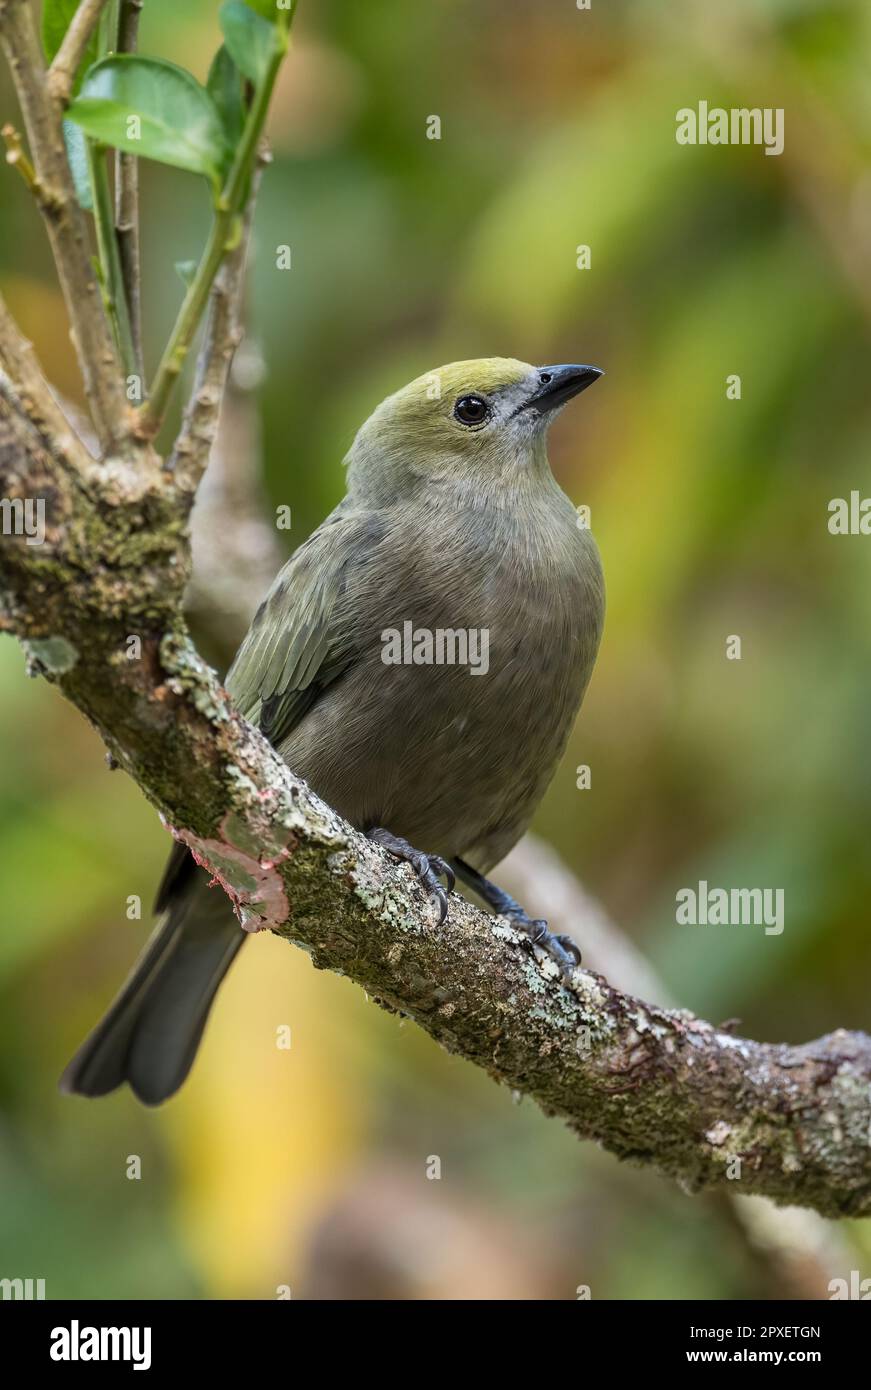 Palm Tanager - Thraupis palmarum, beautiful gray perching bird from Latin America woodlands, forests and gardens, El Valle de Anton, Panama. Stock Photo